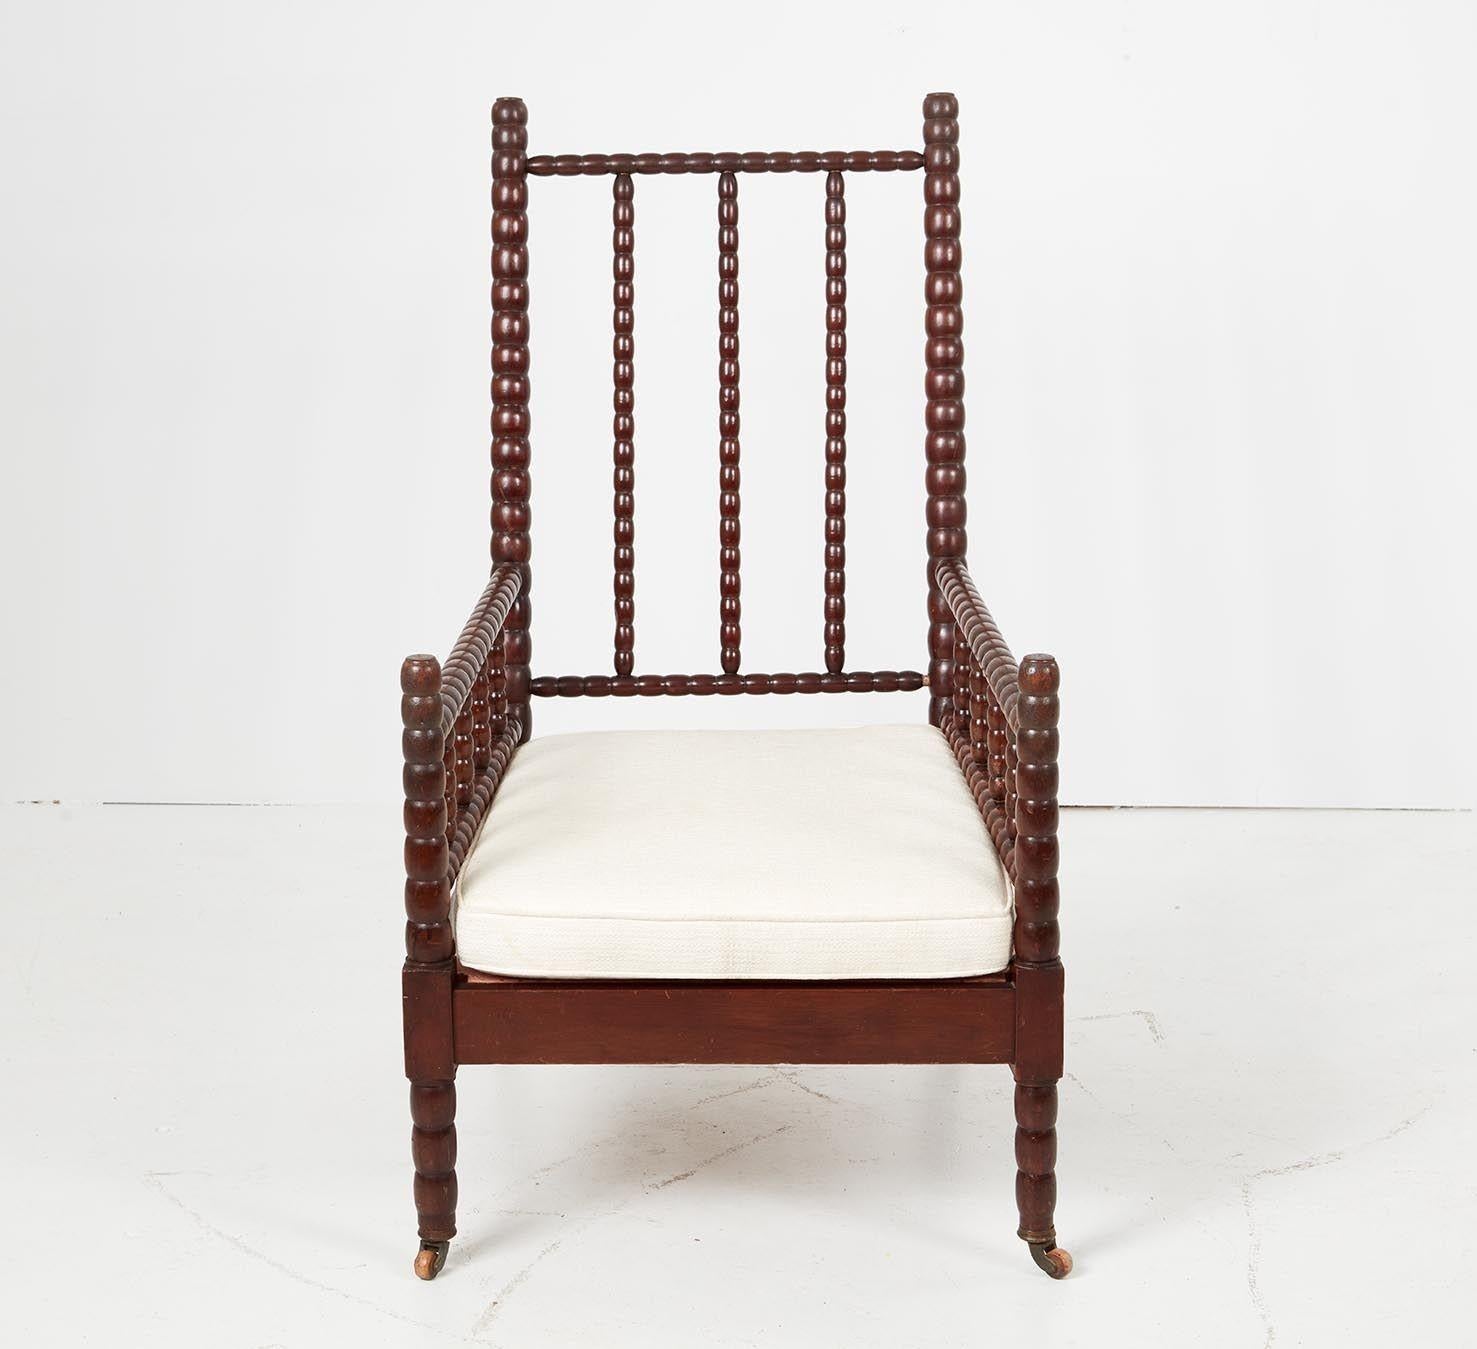 A large bobbin turned armchair with raked back on bobbin fenced arms over deep, generous seat, on front bobbin legs and shaped square section back legs with castors. Upholstered seat support. Detachable back and seat cushions in need of reupholstery